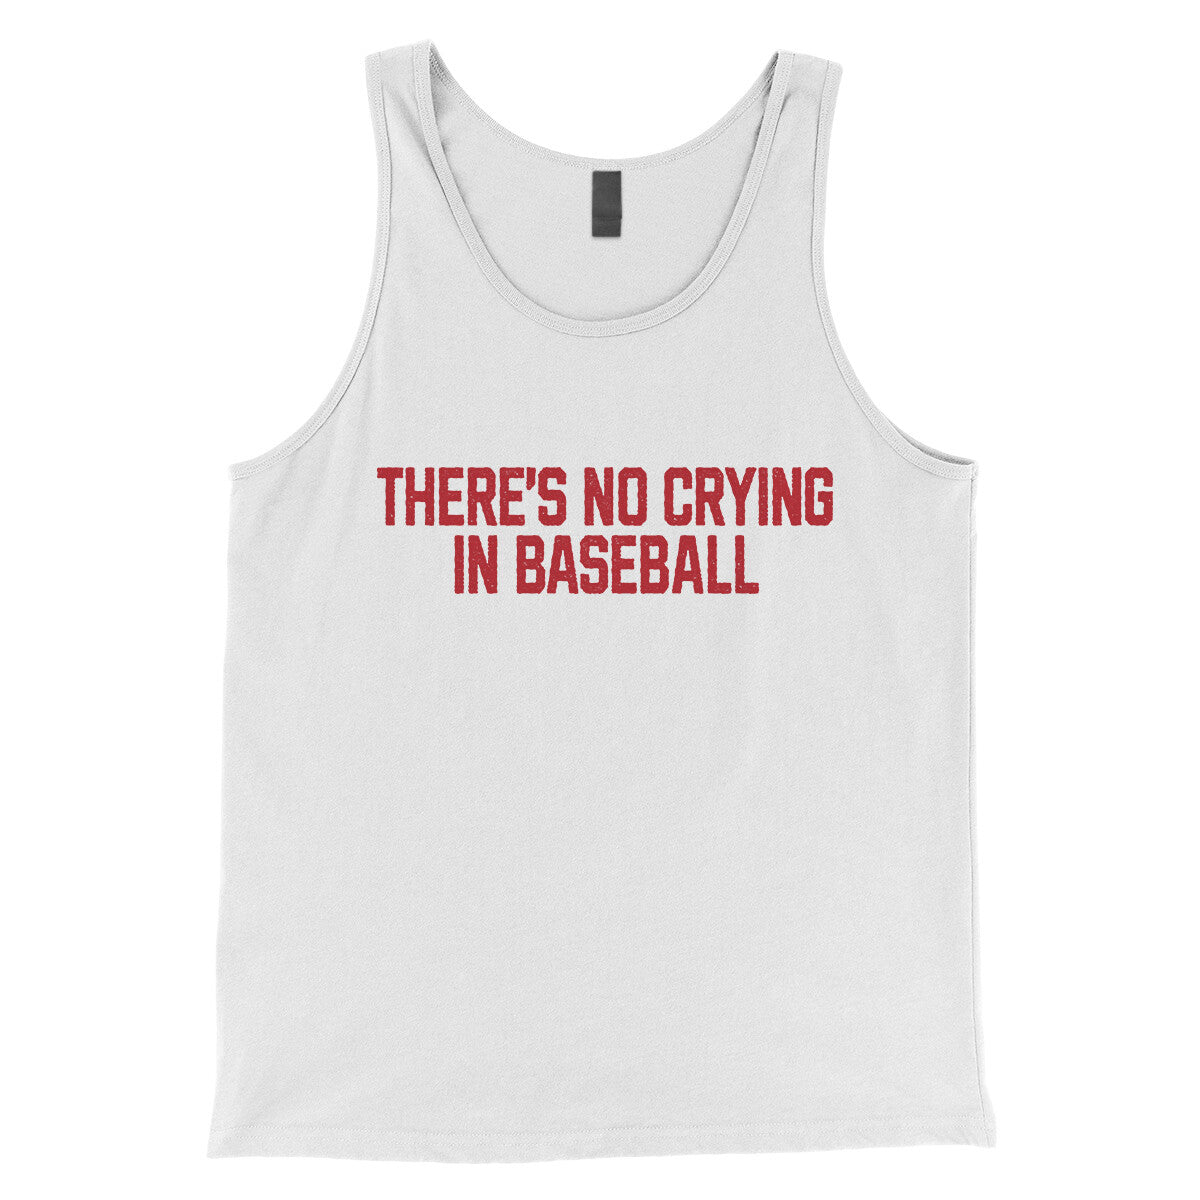 There's No Crying in Baseball in White Color